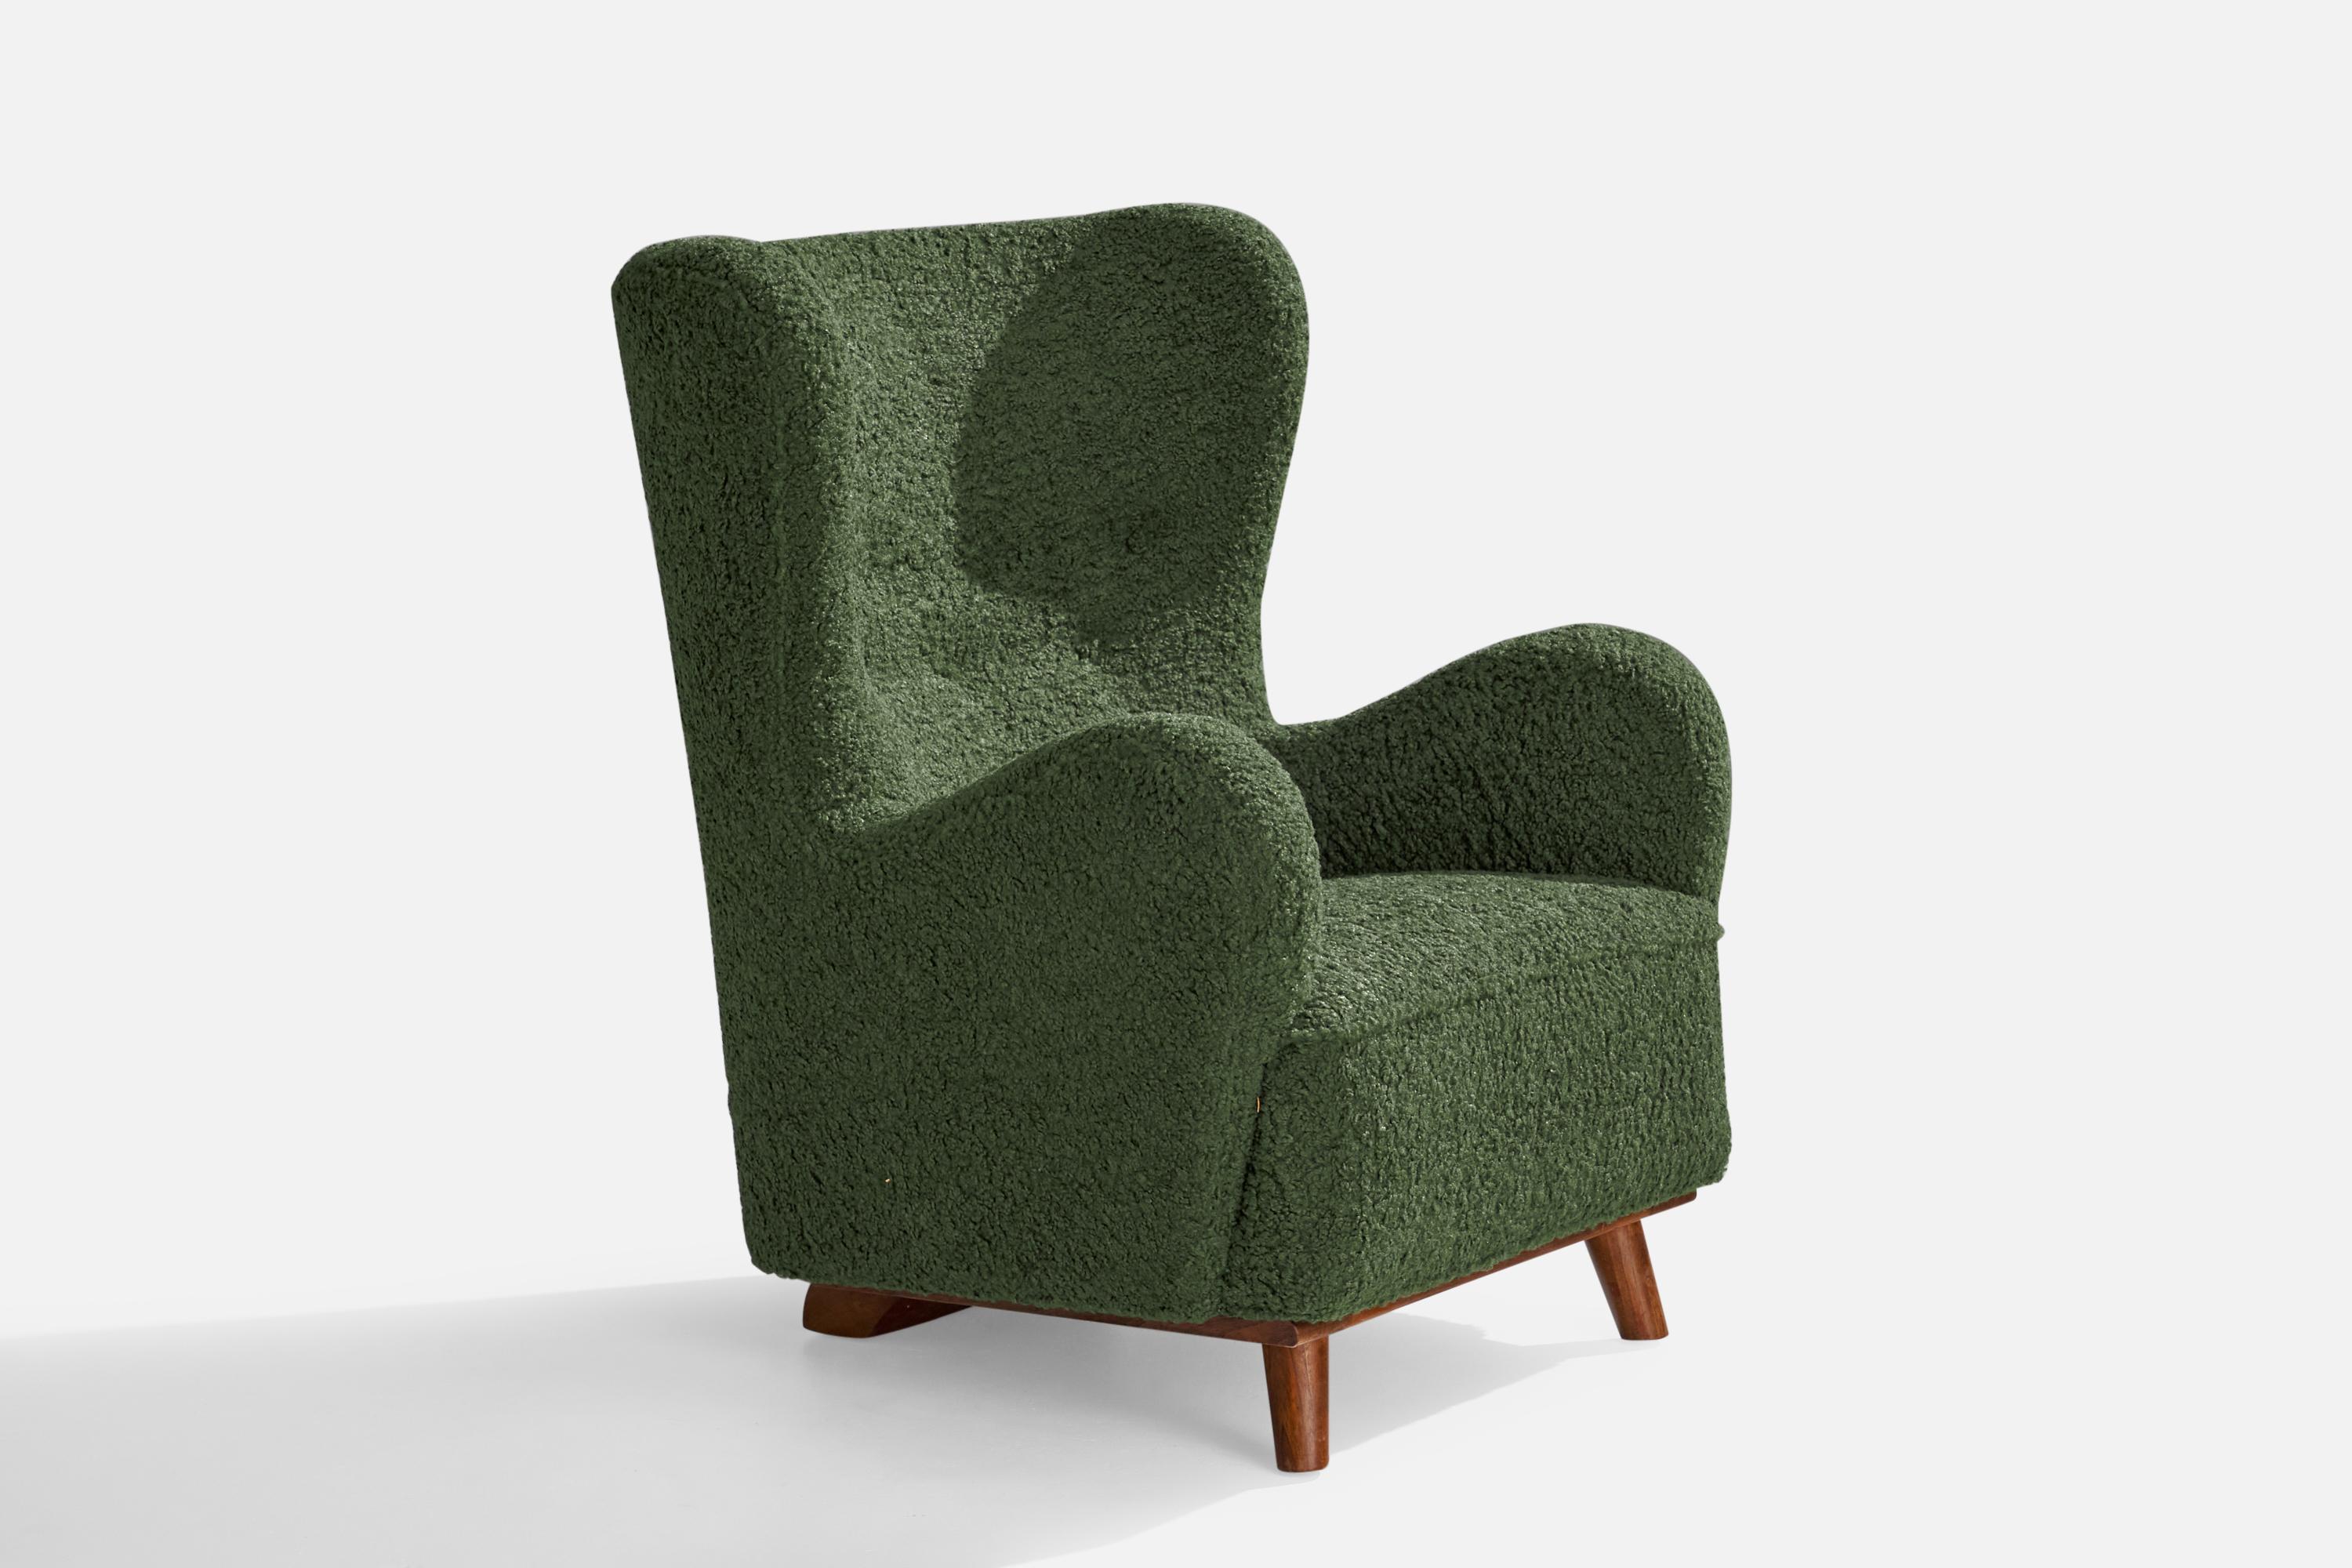 A green bouclé fabric and stained beech lounge chair designed and produced in Denmark, c. 1930s.

Seat height 16.5”.